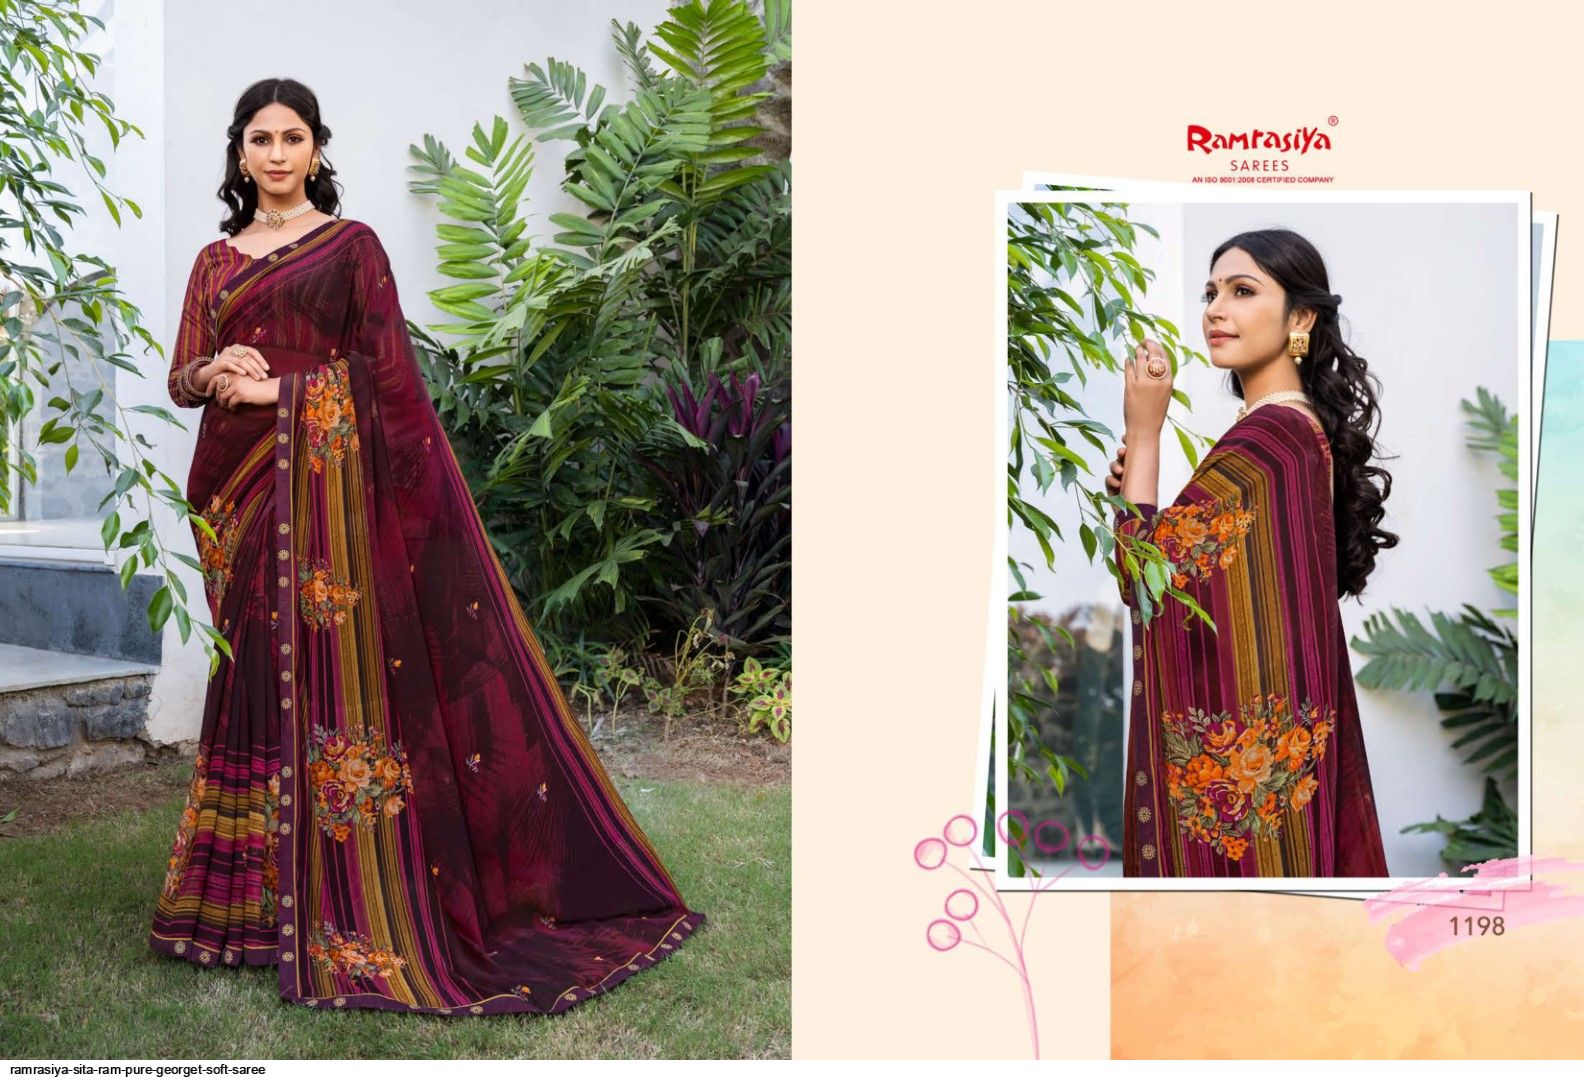 Indian Saree/Sari, Cheap Sarees Online, Fancy Indian Saree for Sale - Check  our Diwali Fashion Collection at Great Price! Get a Fresh Ethnic Look This  Festive Season Click on Link : https://www.indianclothstore.com/offer/flat70  |